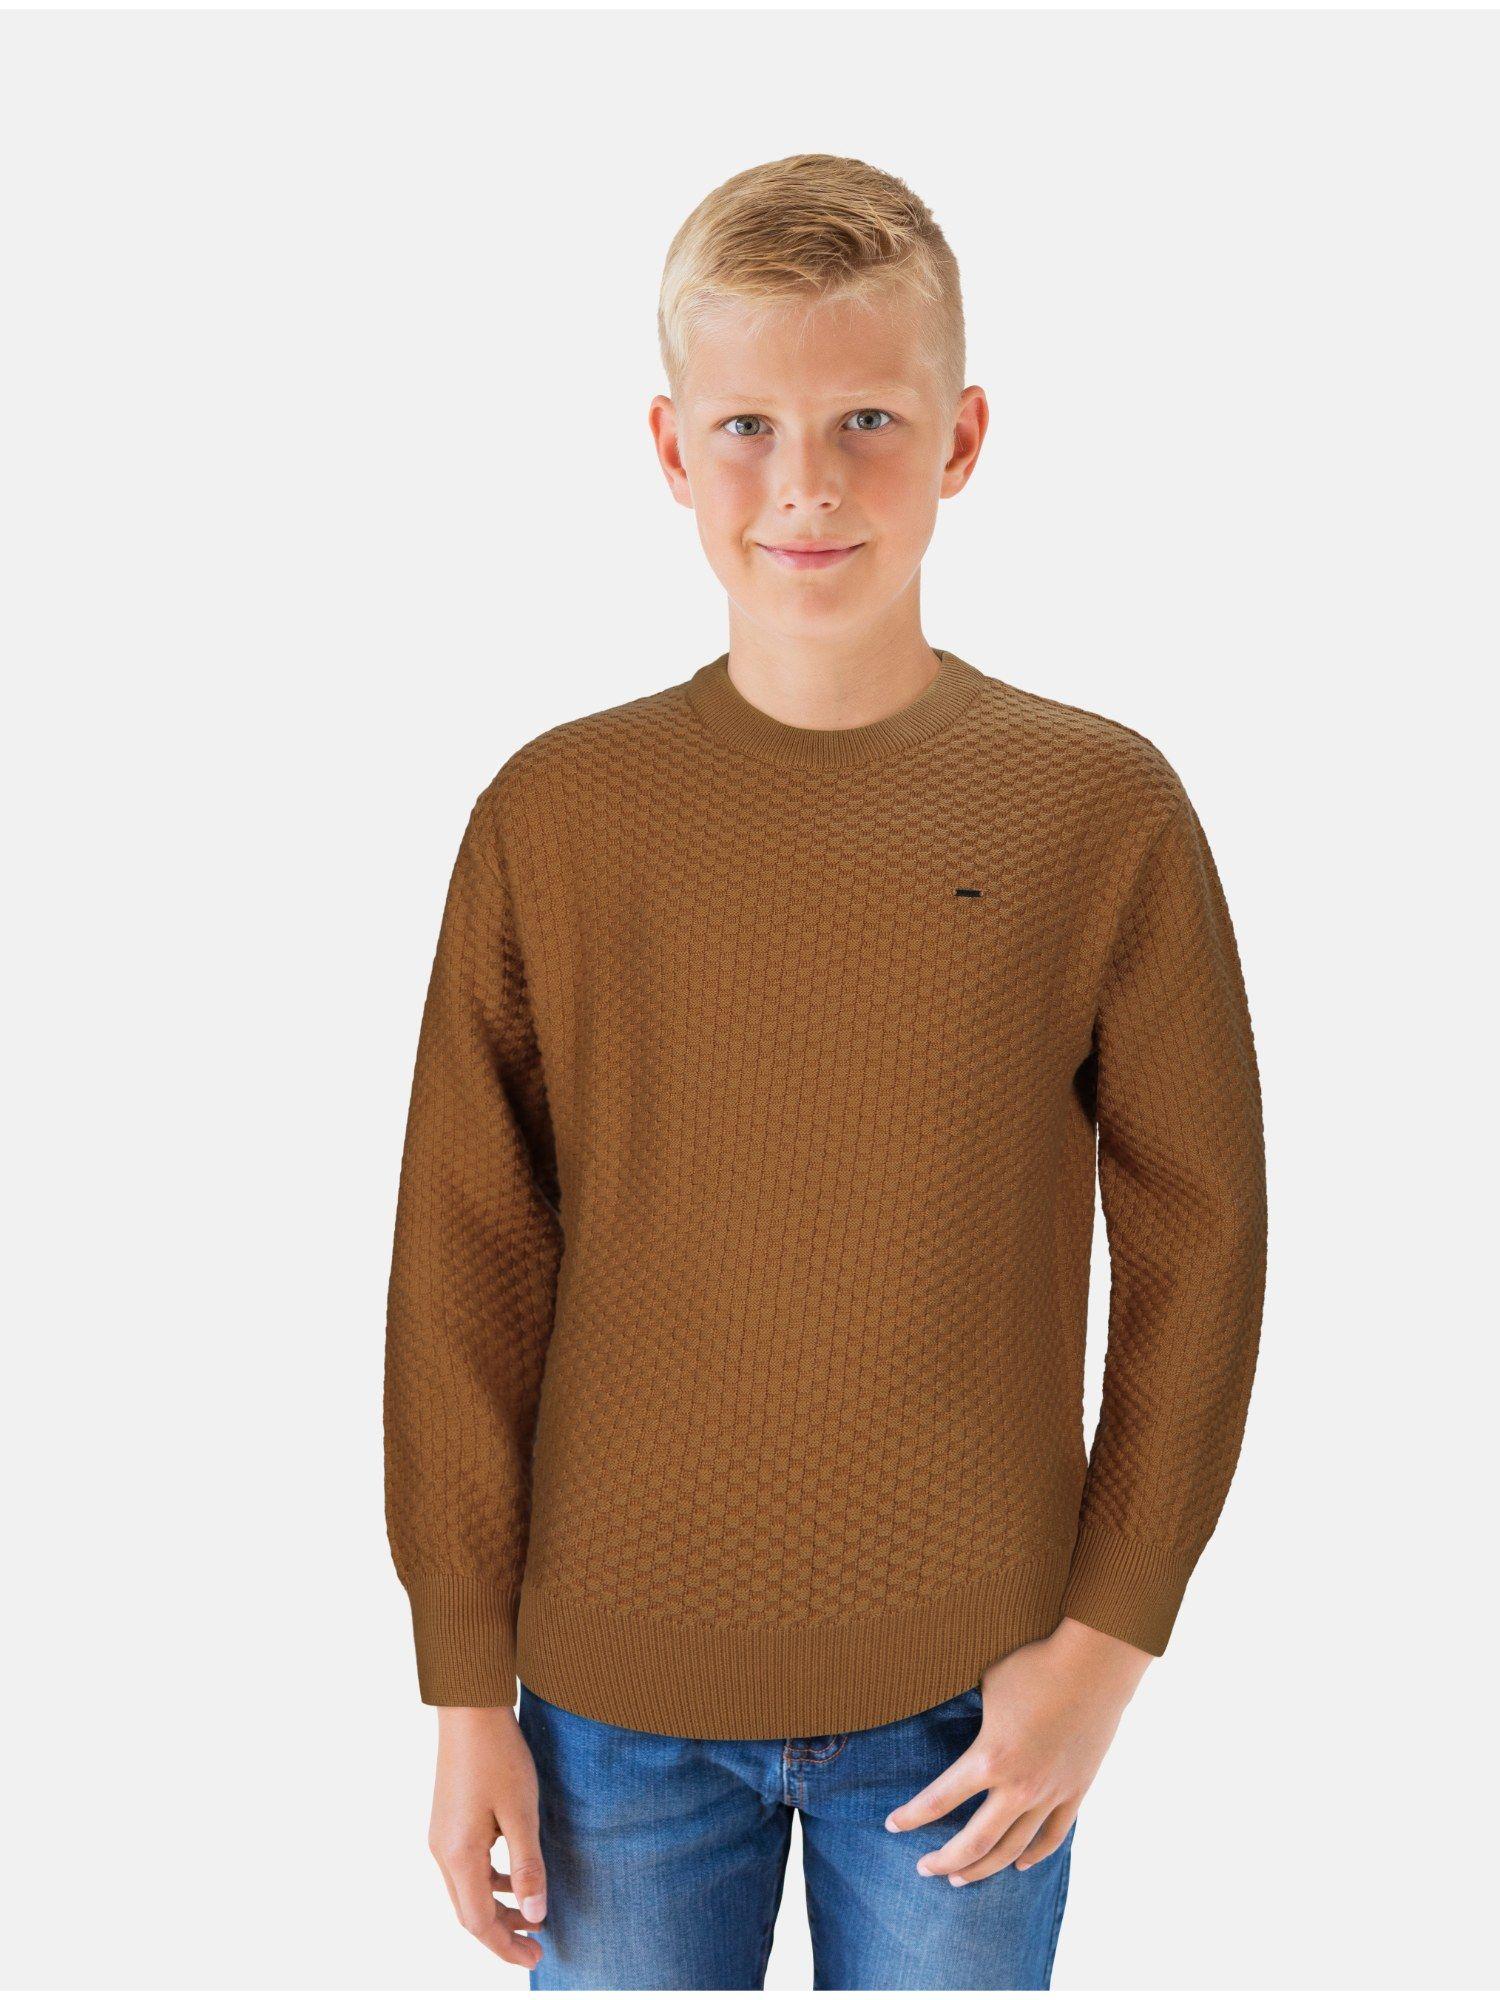 boys brown woven solid sweater full sleeves